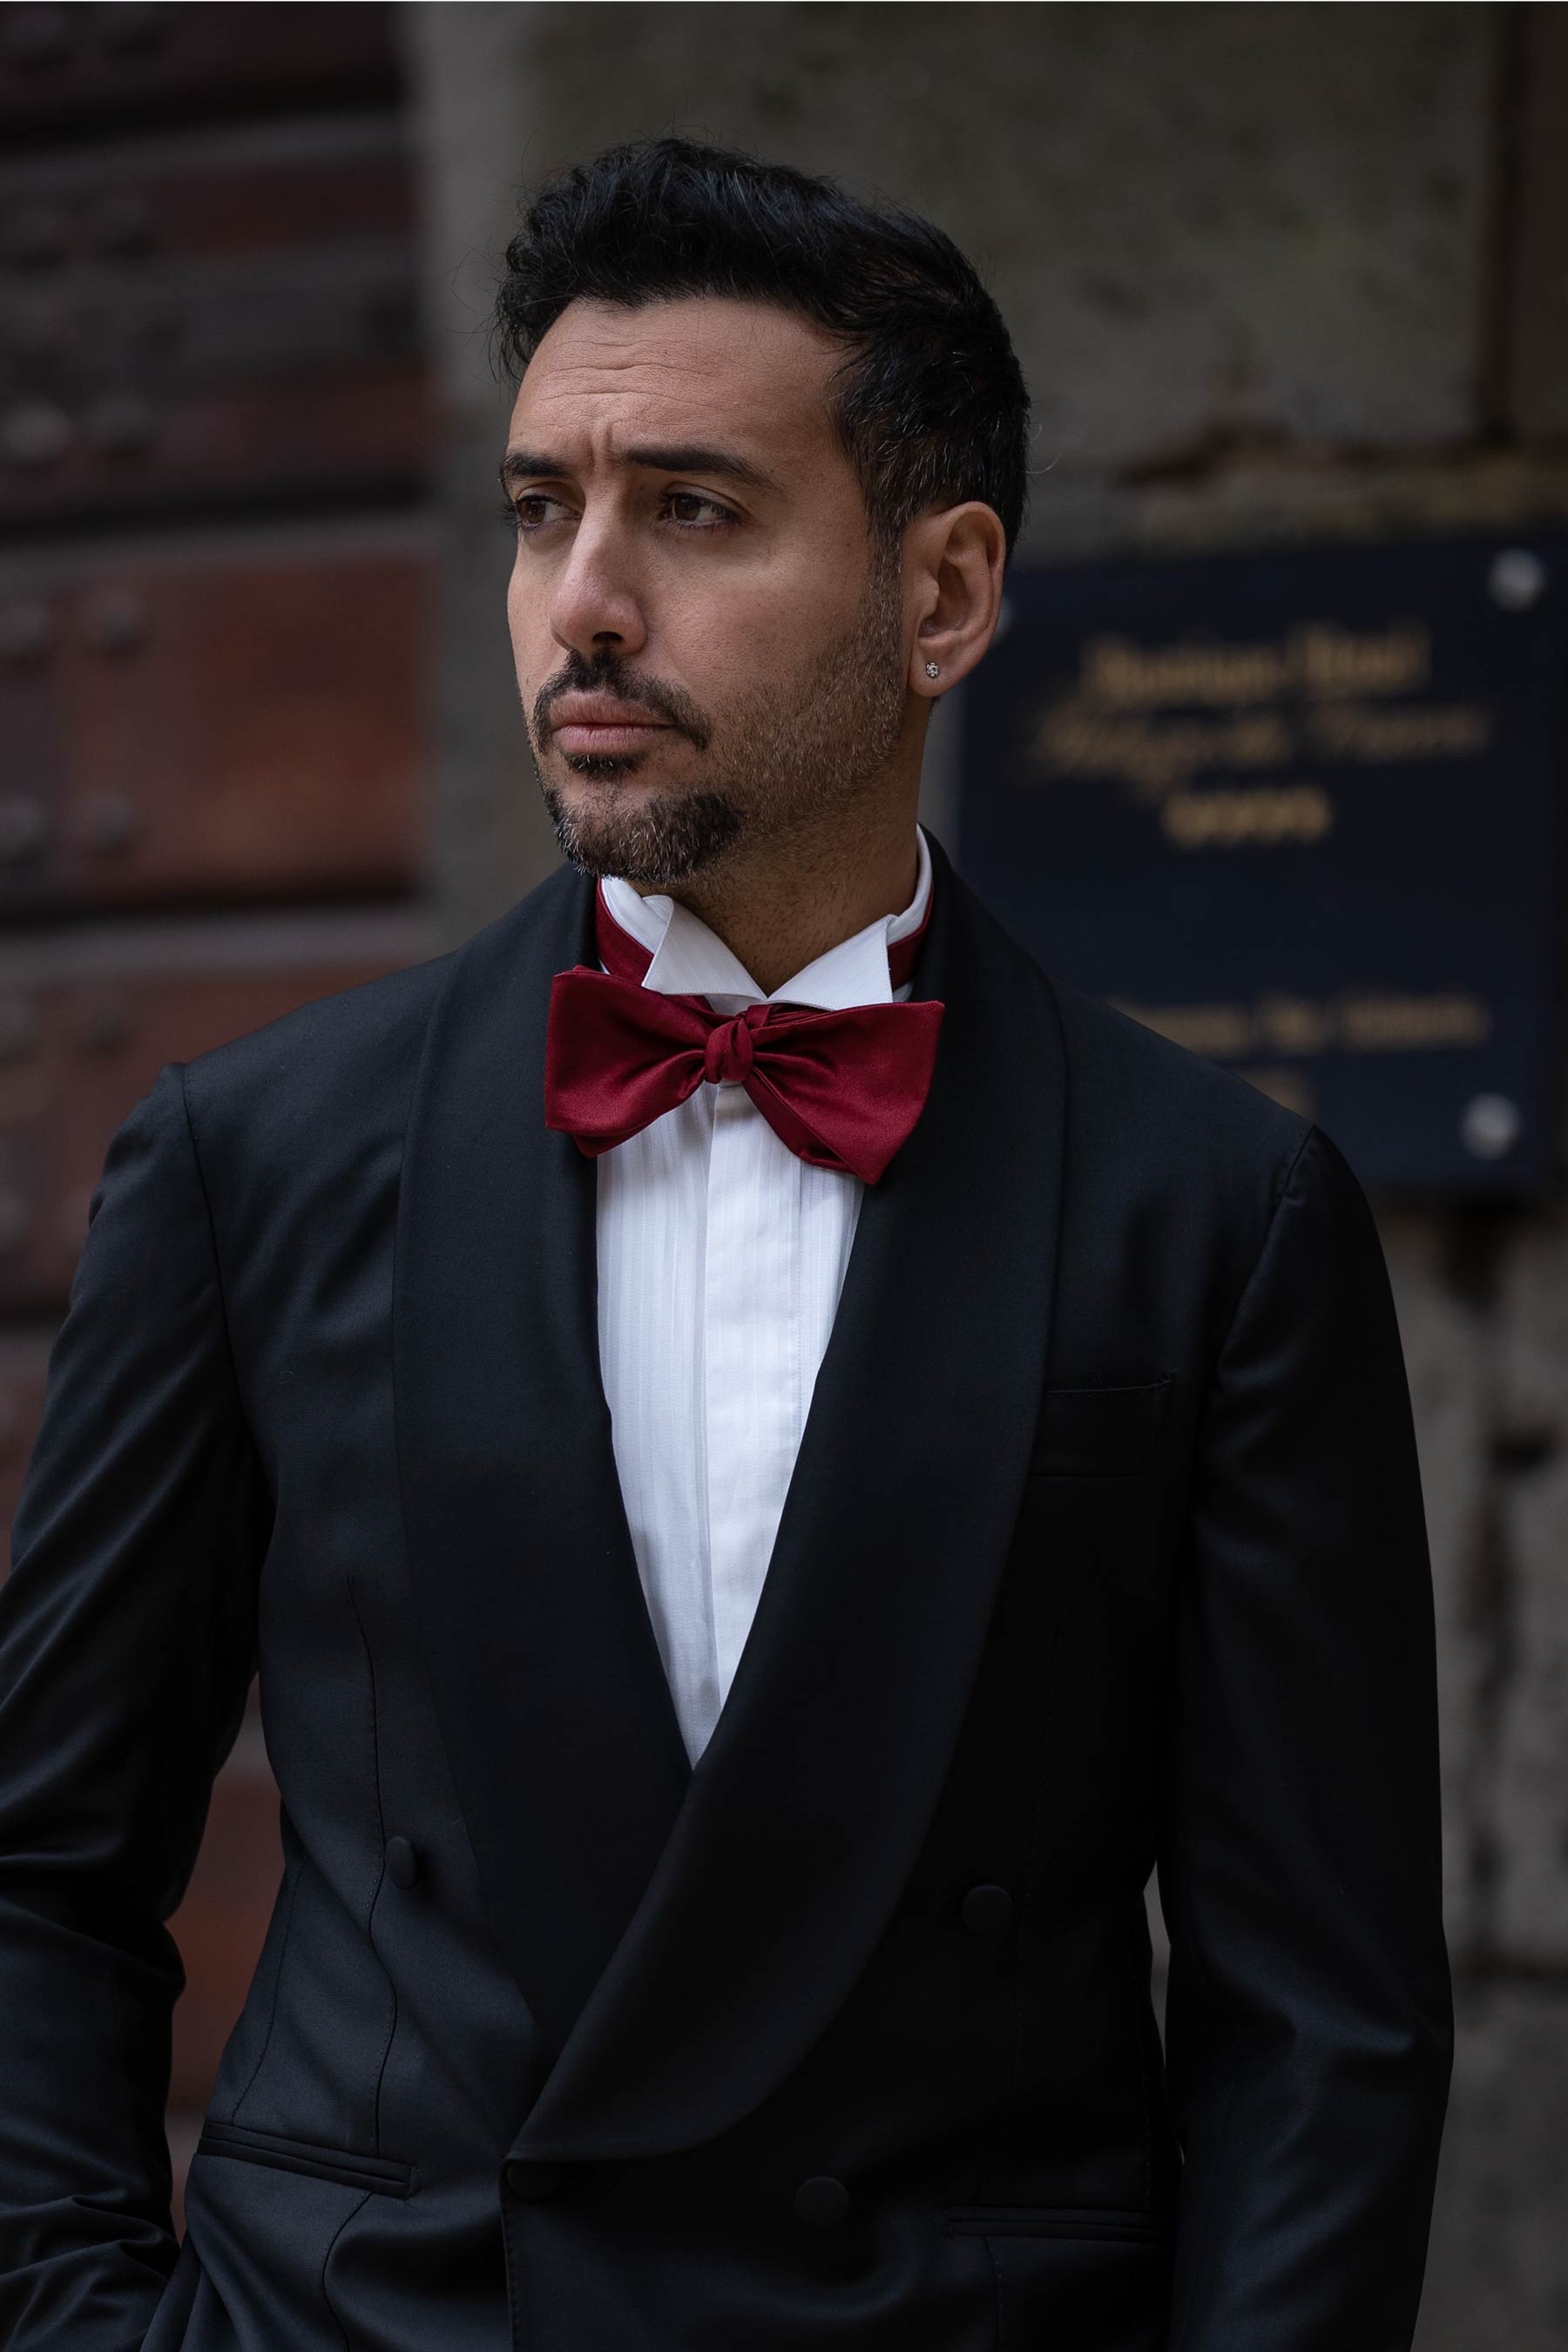 The Ultimate Bow Tie Guide - Art of The Gentleman